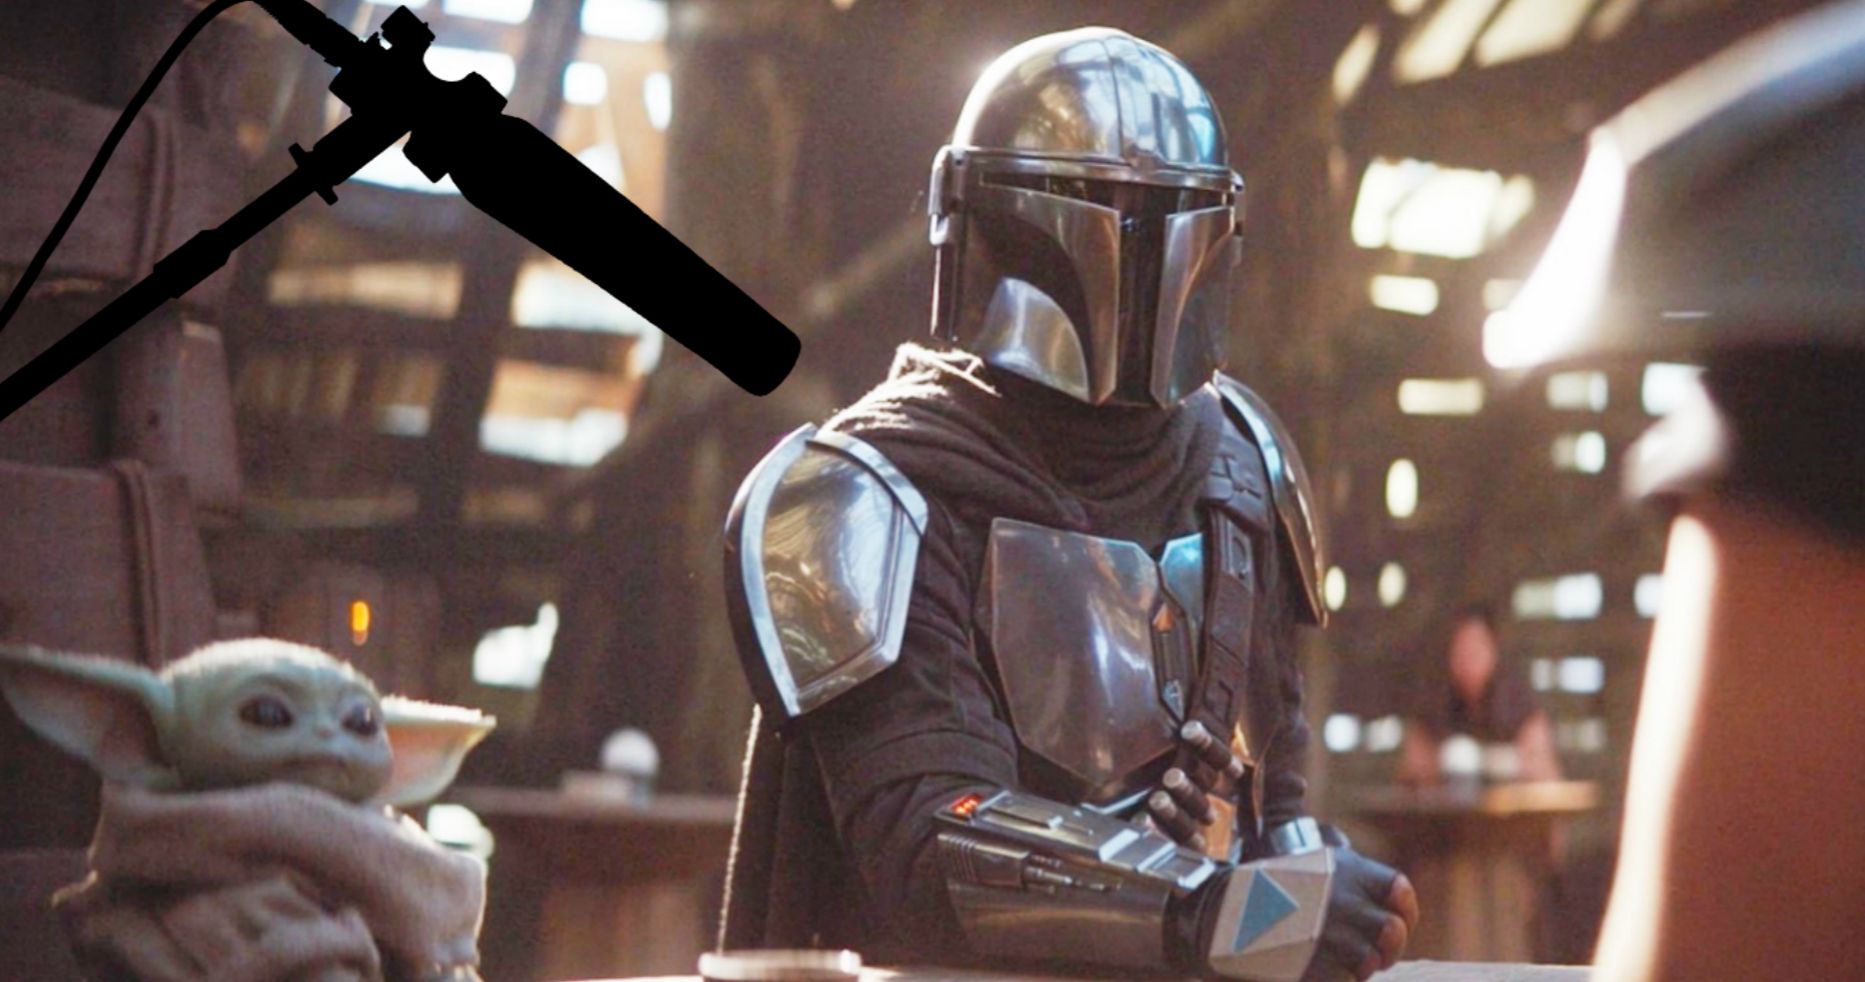 The Mandalorian Boom Mic Mistake Vs. Game of Thrones Coffee Cup: Who Did It Worse?